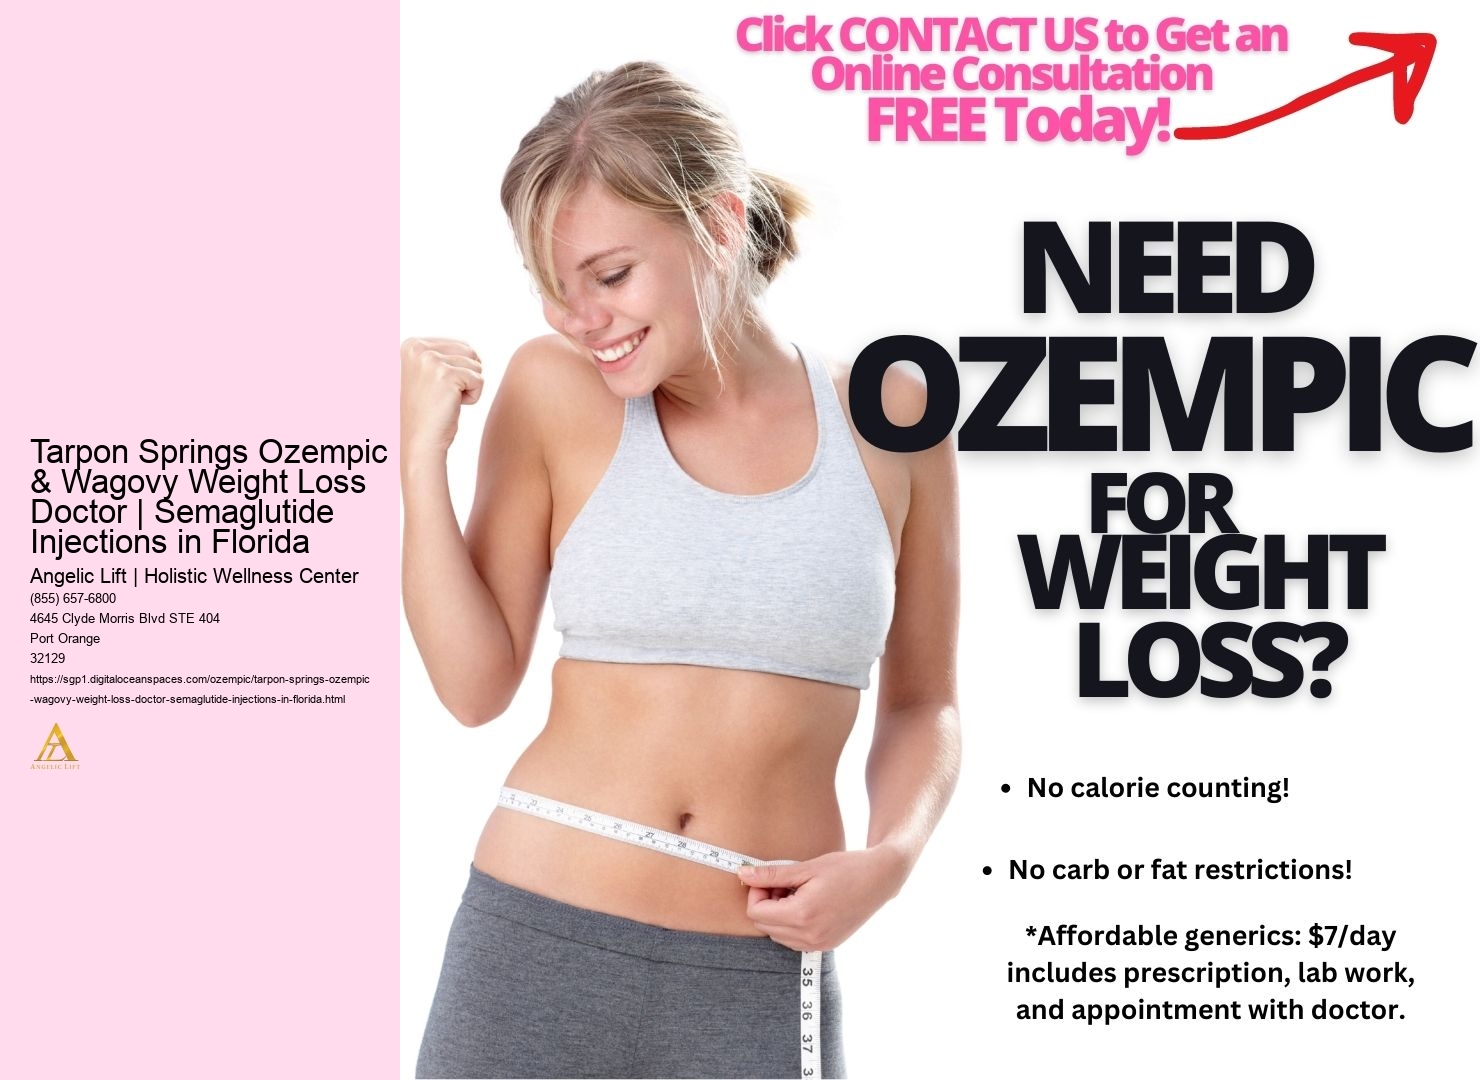 Tarpon Springs Ozempic & Wagovy Weight Loss Doctor | Semaglutide Injections in Florida